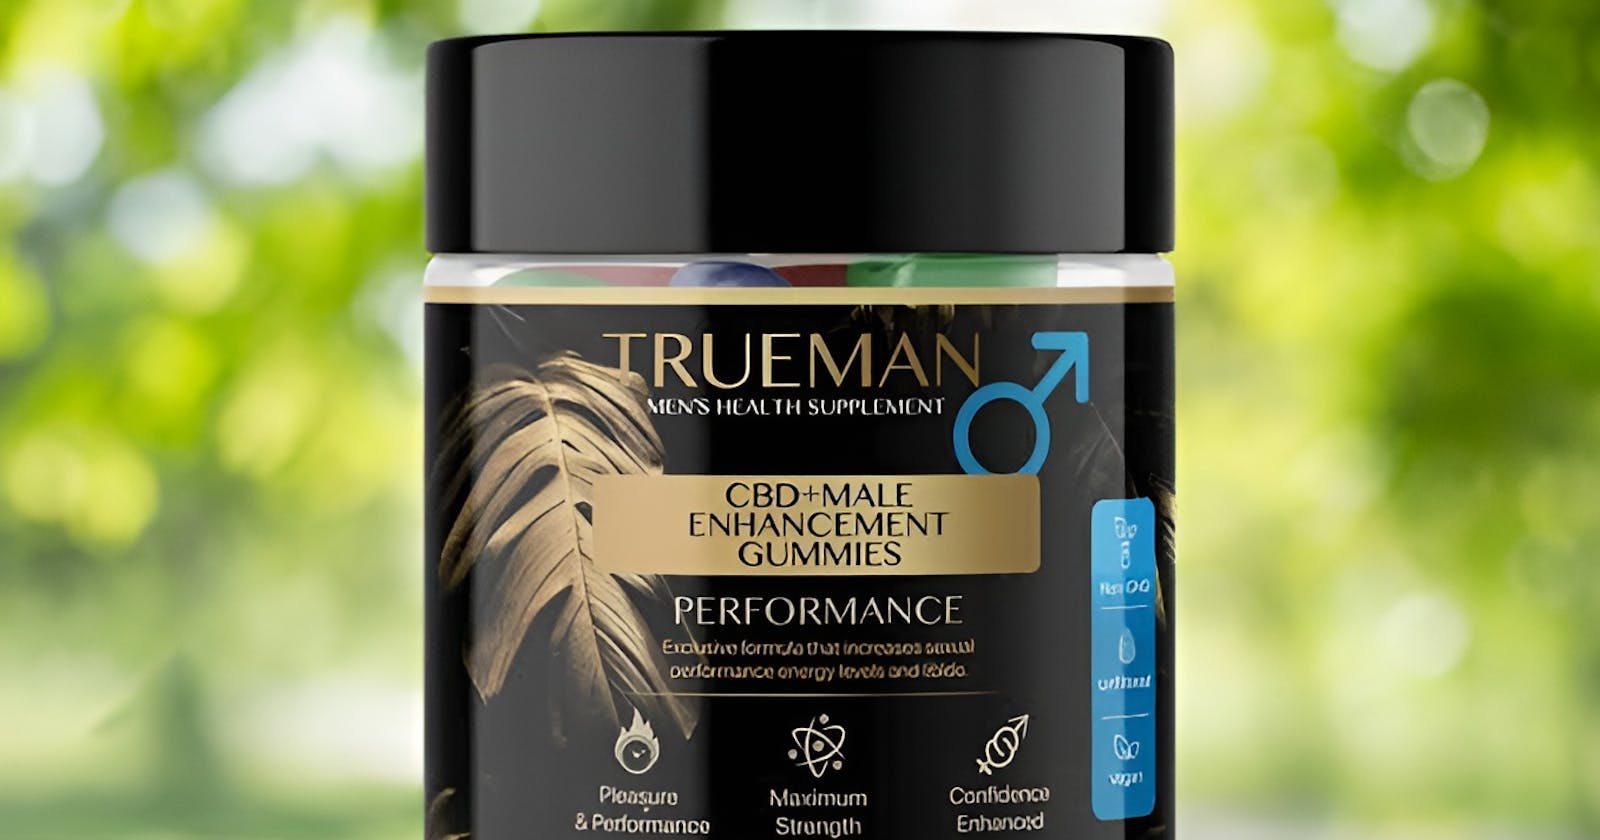 Truman Plus Male Enhancement Get Fun With Yout Partner During Sex (Spam Or Legit)